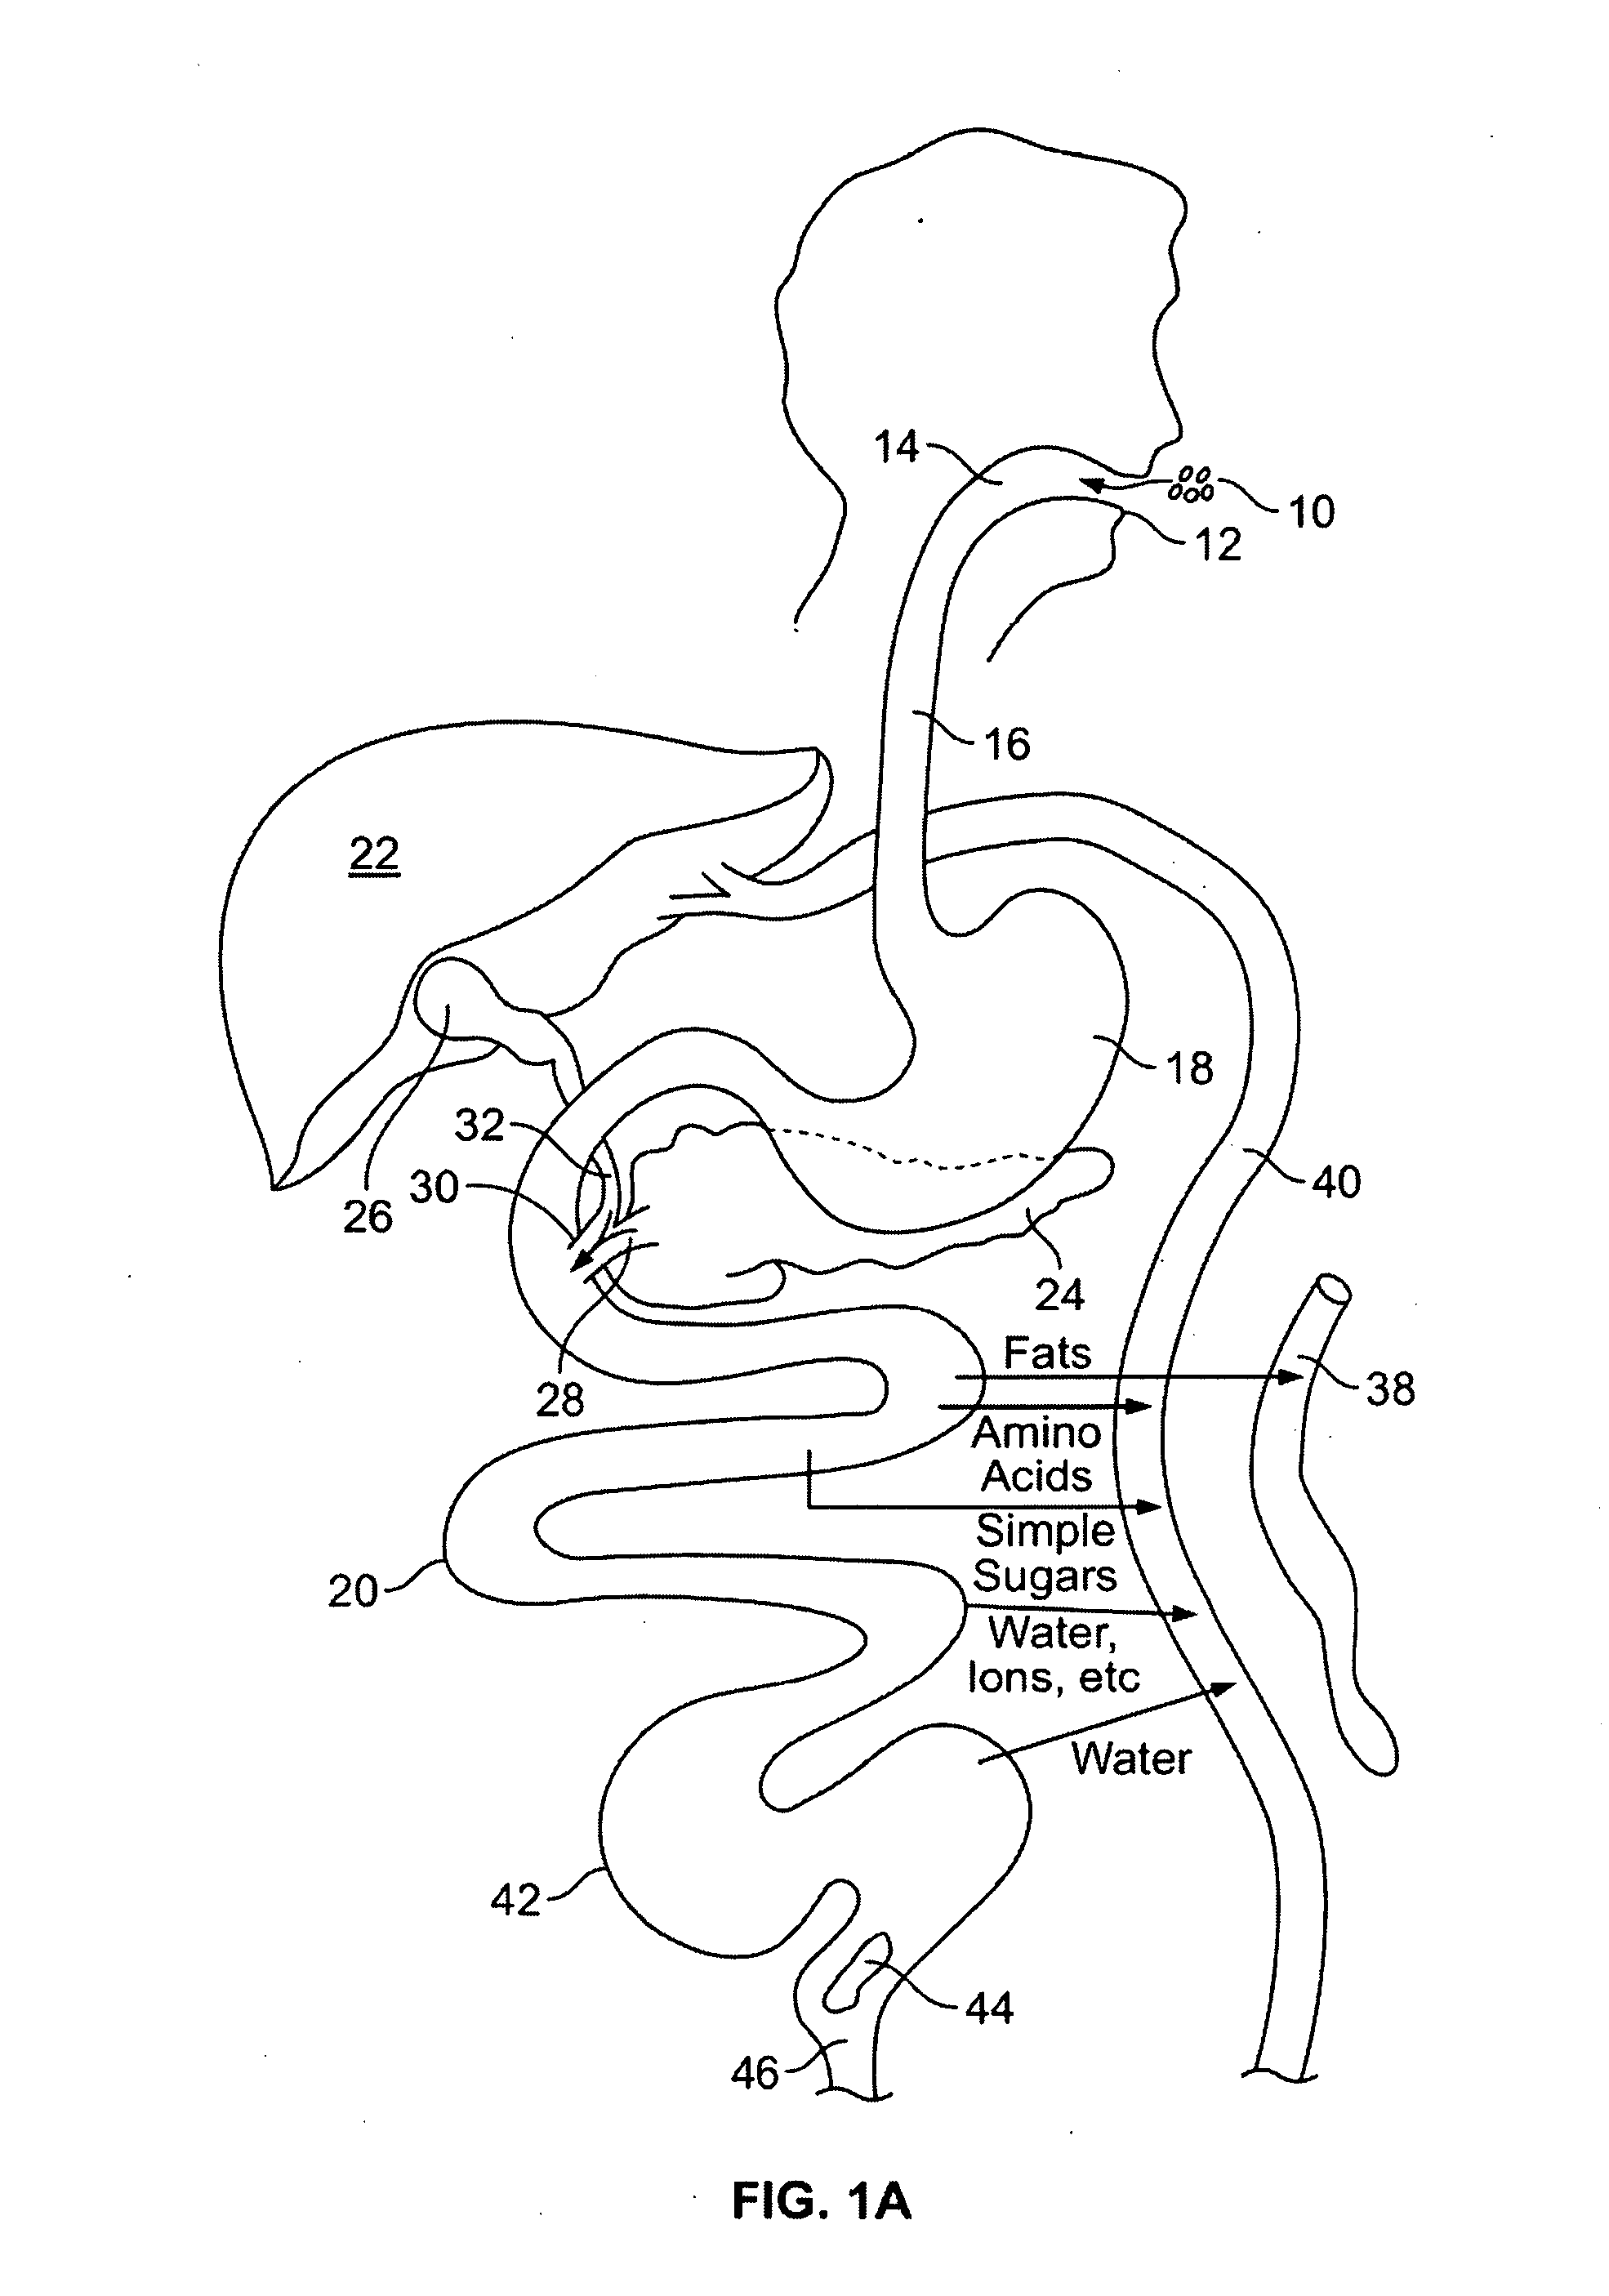 Gastrointestinal implant and methods for use